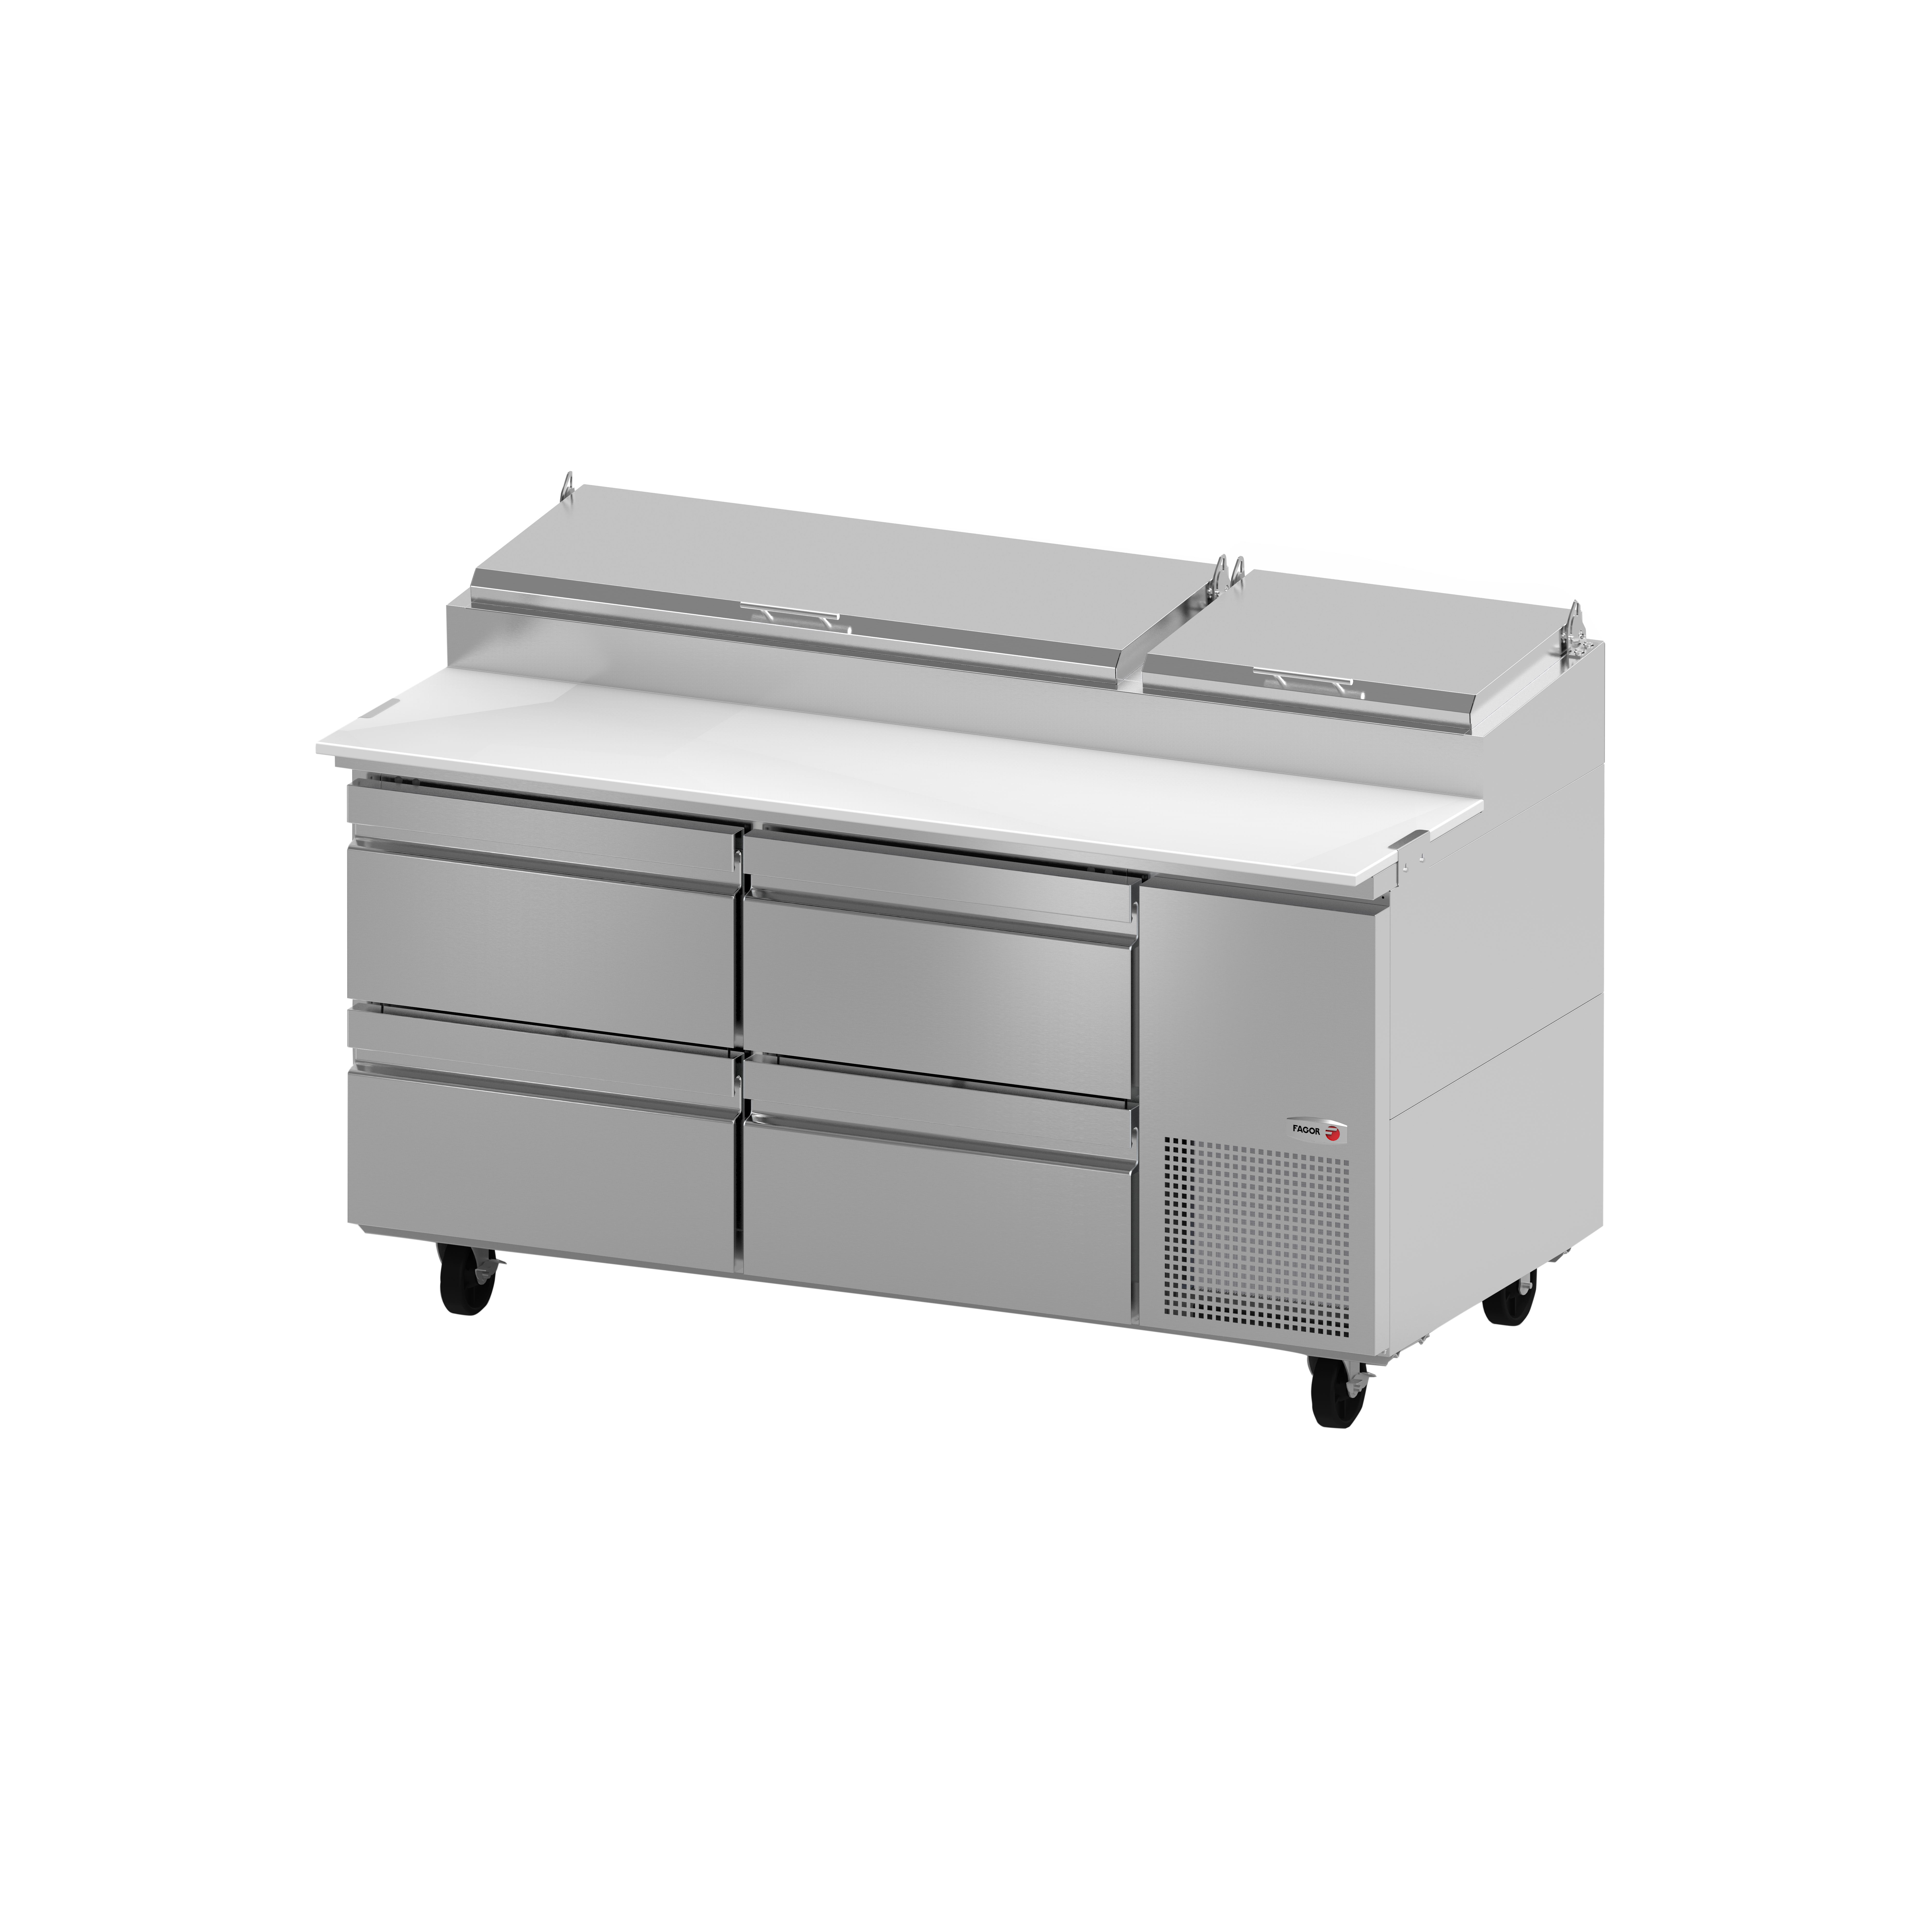 Fagor Refrigeration FPT-67-D4 Pizza Prep Table Refrigerated Counter